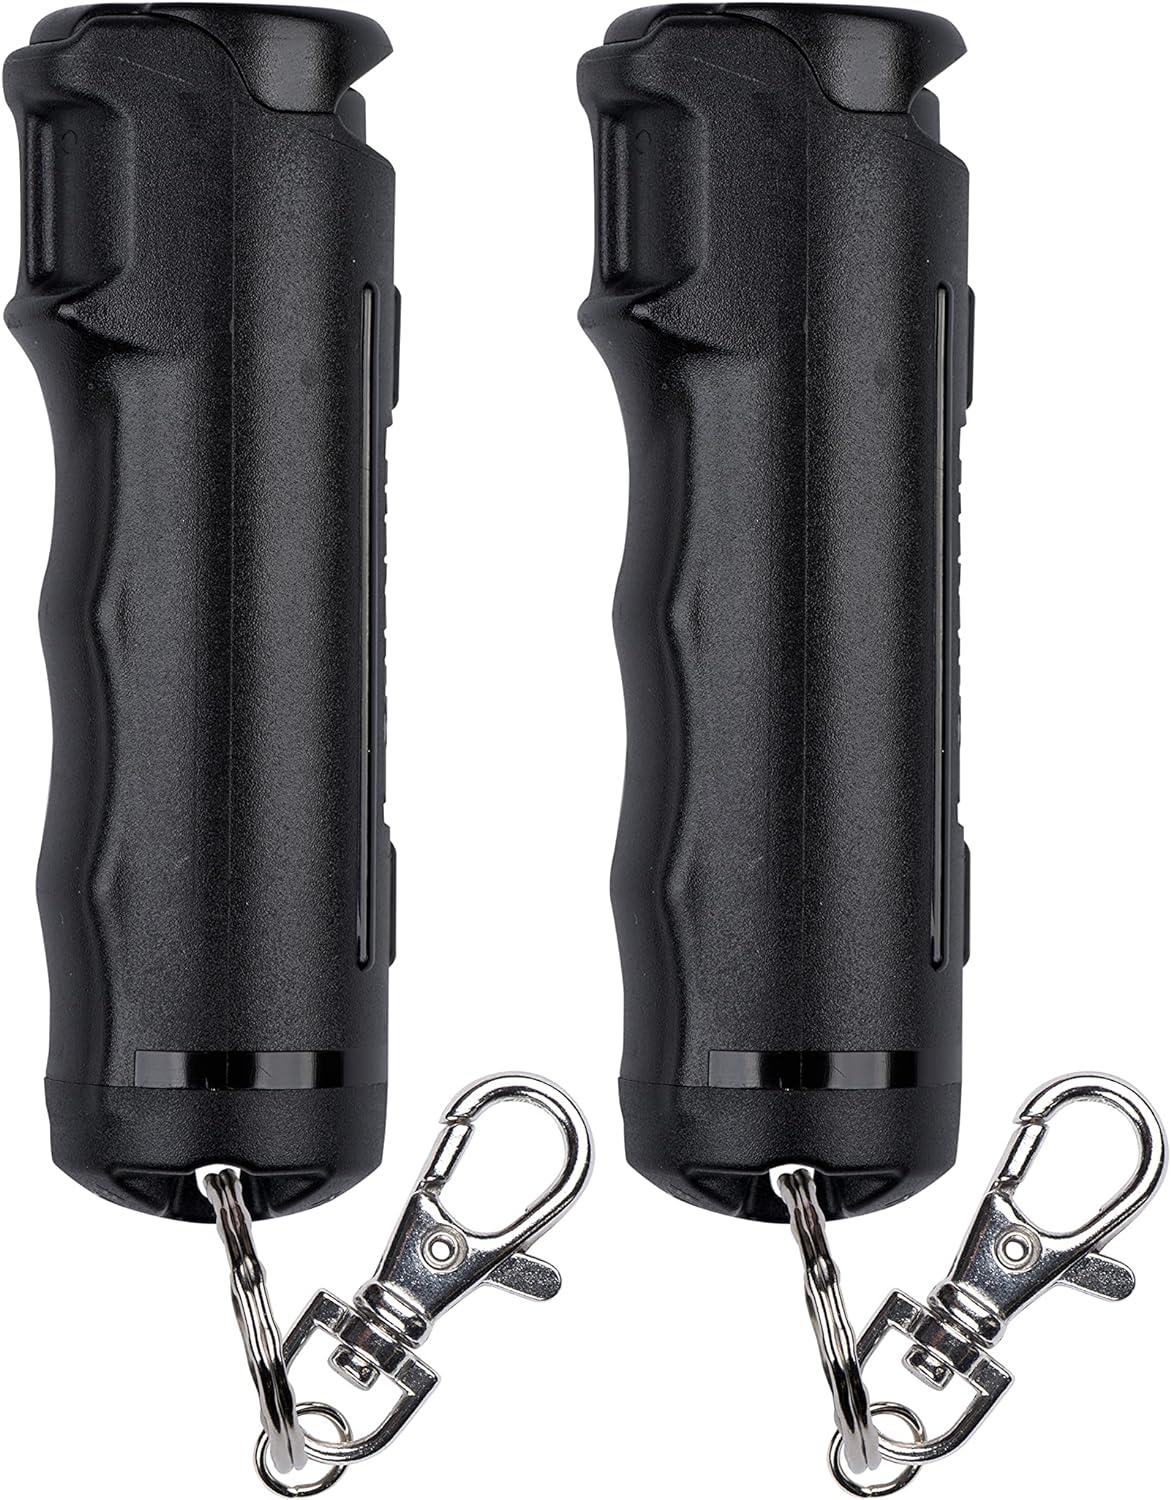  FIGHTSENSE Self Defense Pepper Spray - 1/2 oz Compact Size  Maximum Strength Police Grade Formula Best Self Defense Tool for Women  W/Leather Pouch Keychain (Black) : Sports & Outdoors